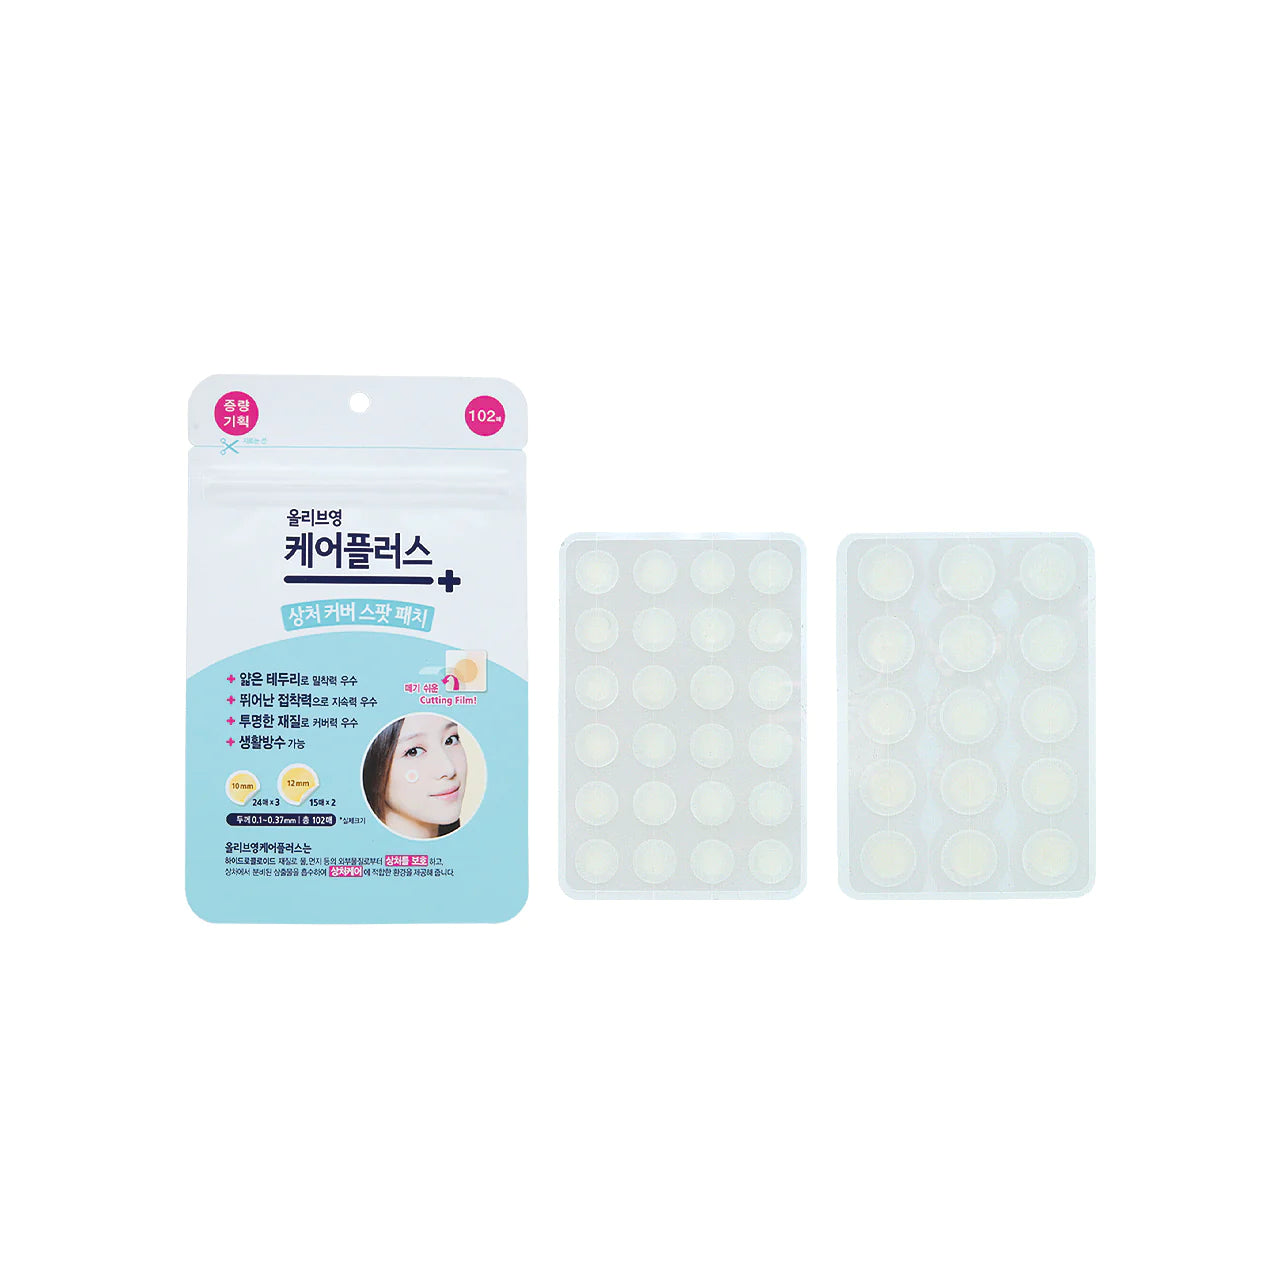 OLIVE YOUNG Care Plus Scar Cover Spot Patch 102P/pack